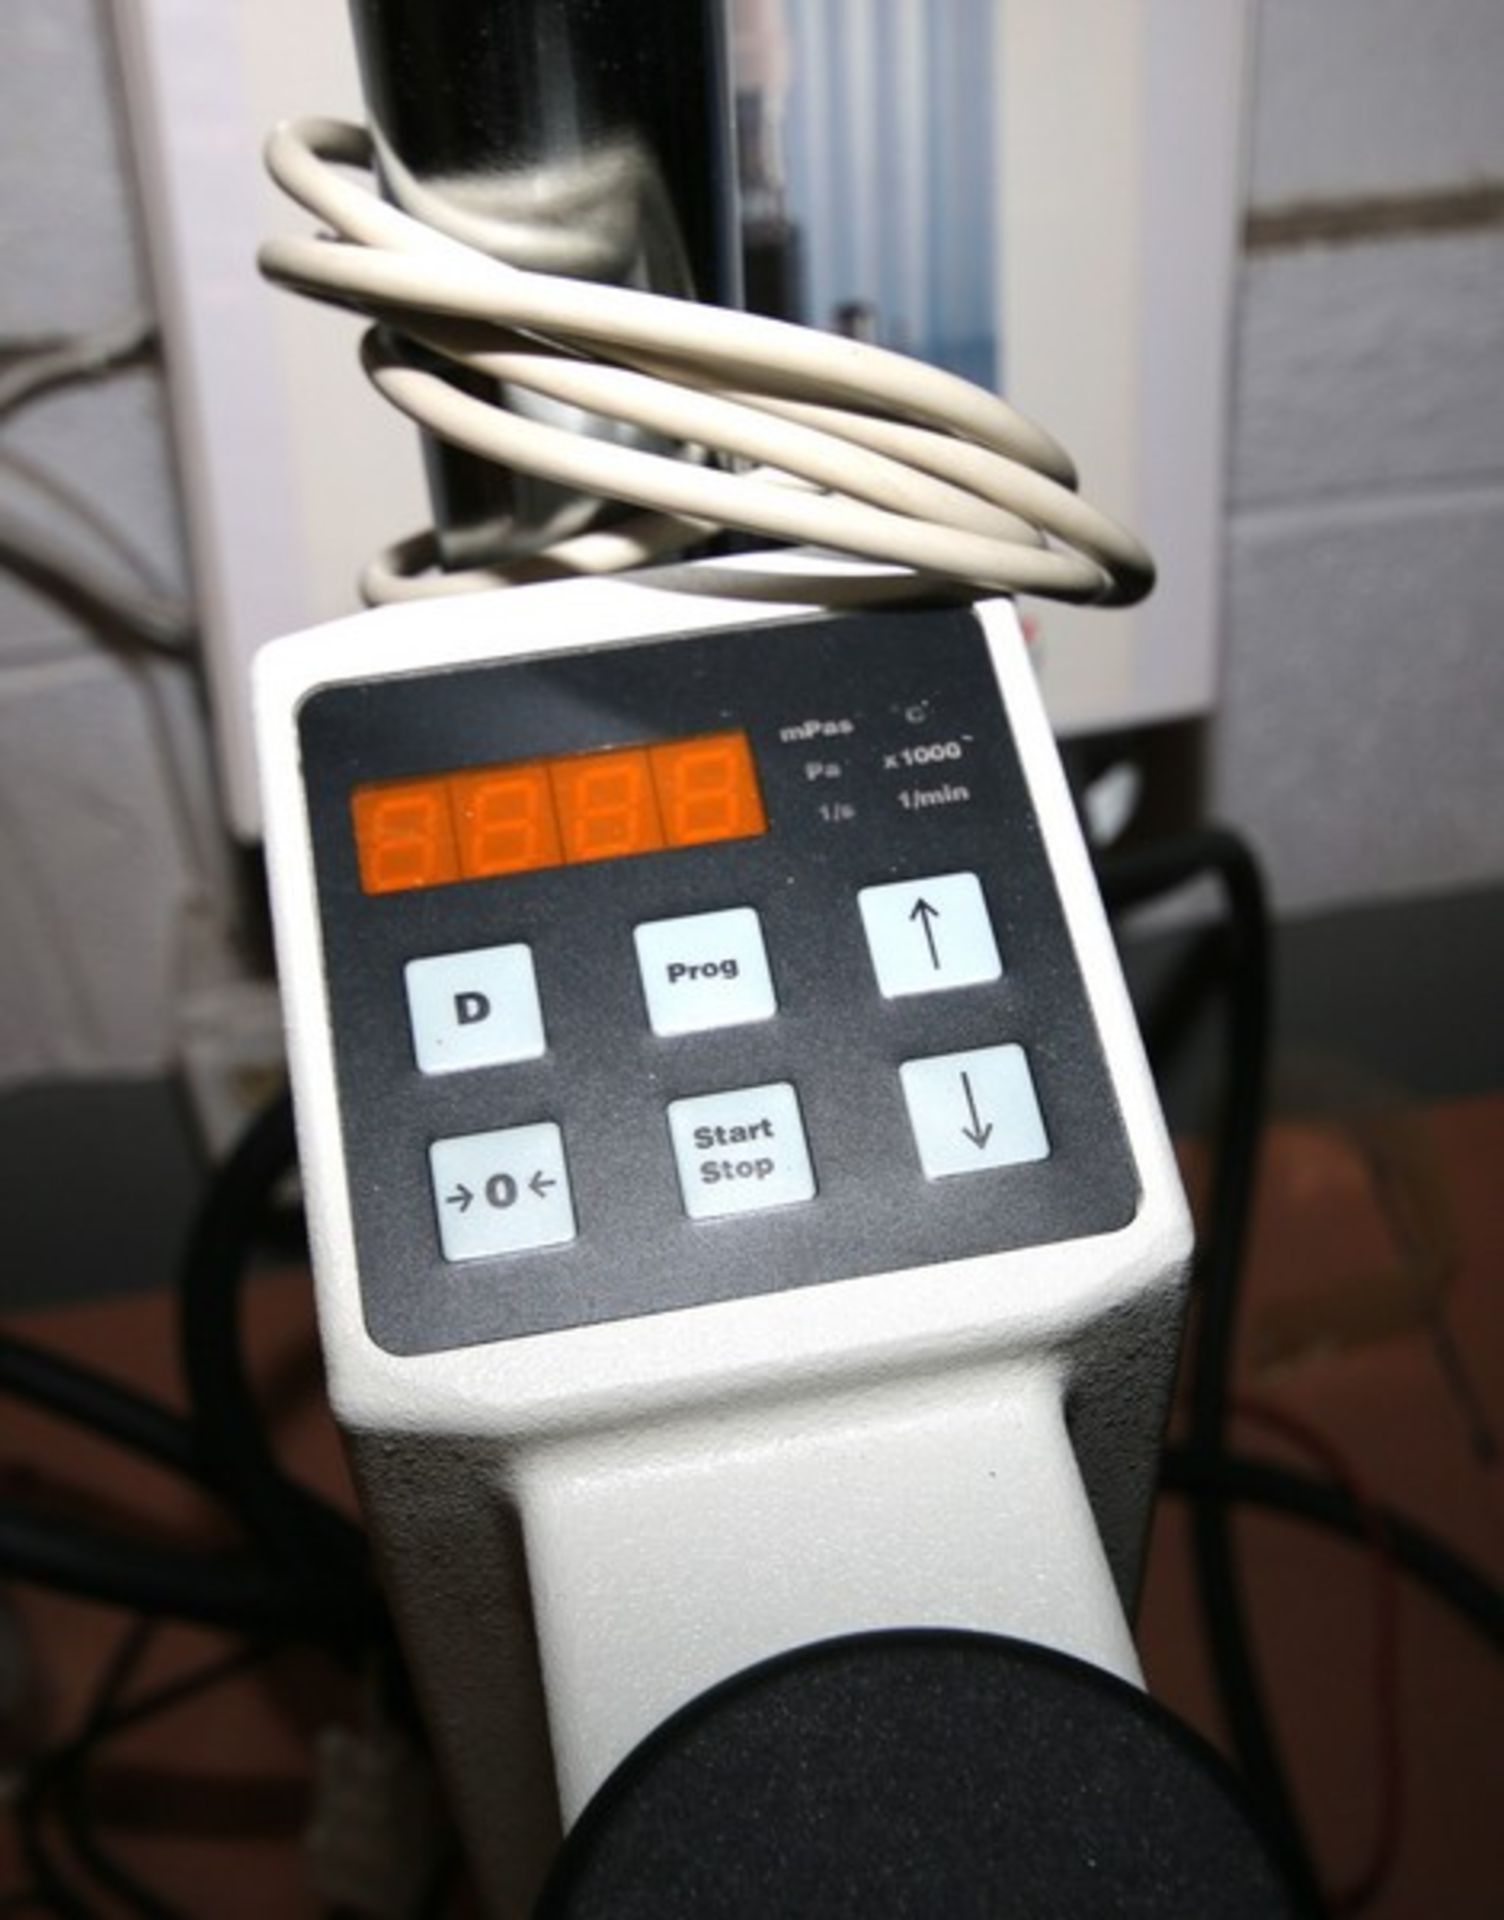 Haake Viscotester, Model 550 Type 002-7026 1 08003704 007, with Heating Chamber Mounted on Stand - Image 4 of 7